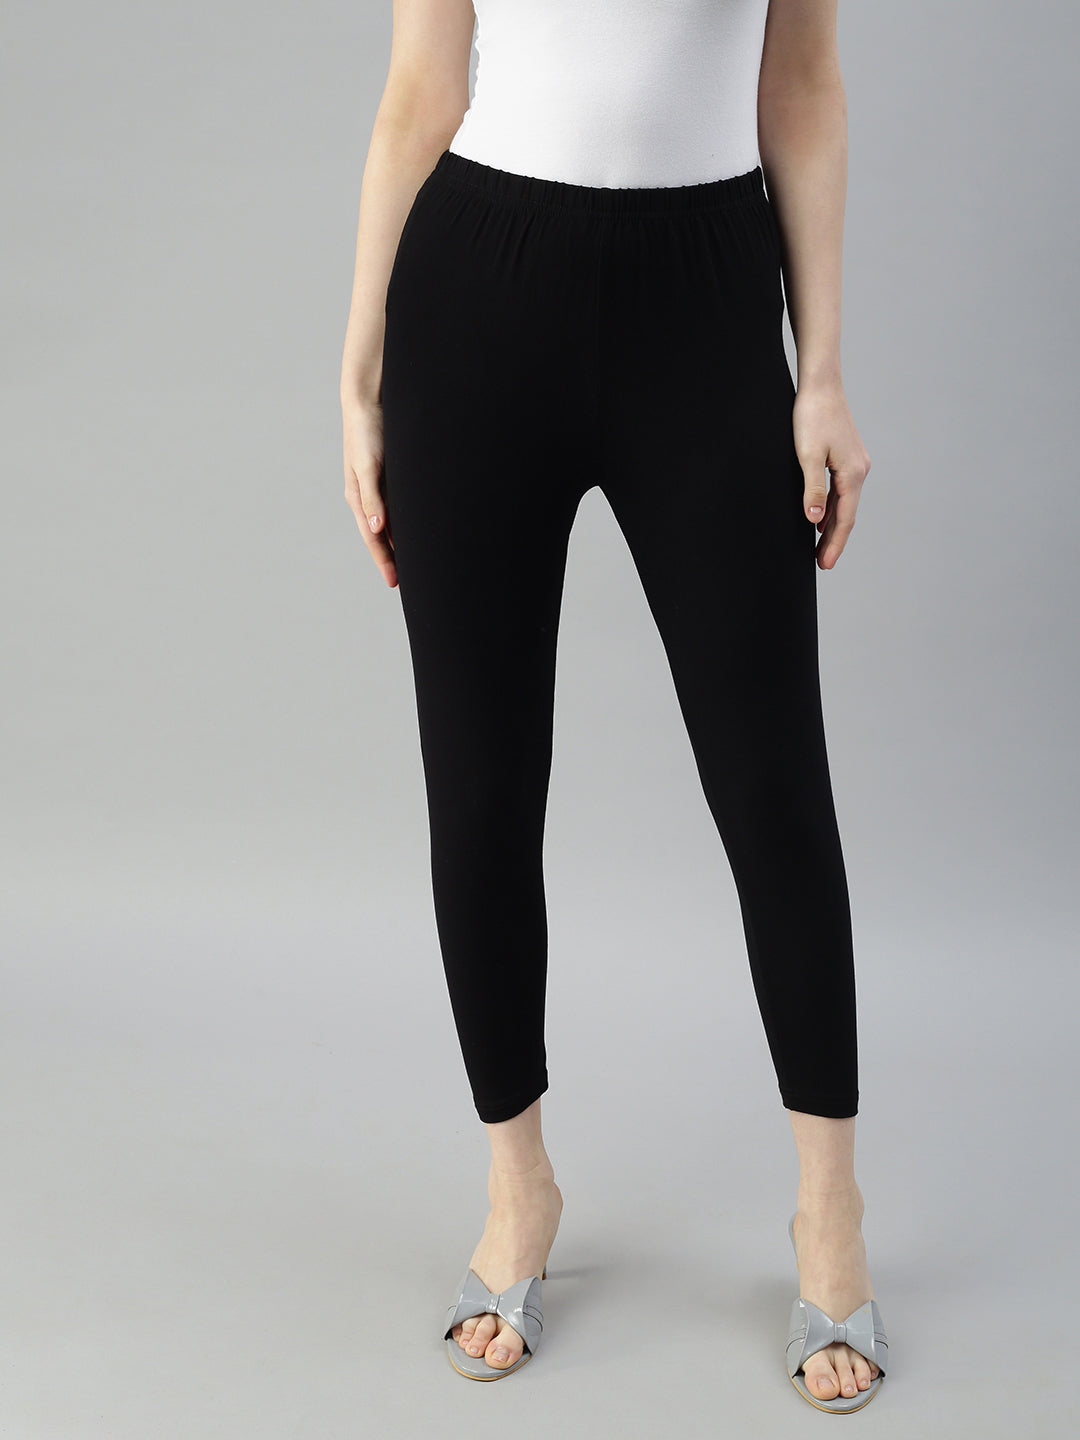 Buy CUVU Ankle Leggings for Women's - Size (XL) Colour (Anthra Melang) at  Amazon.in